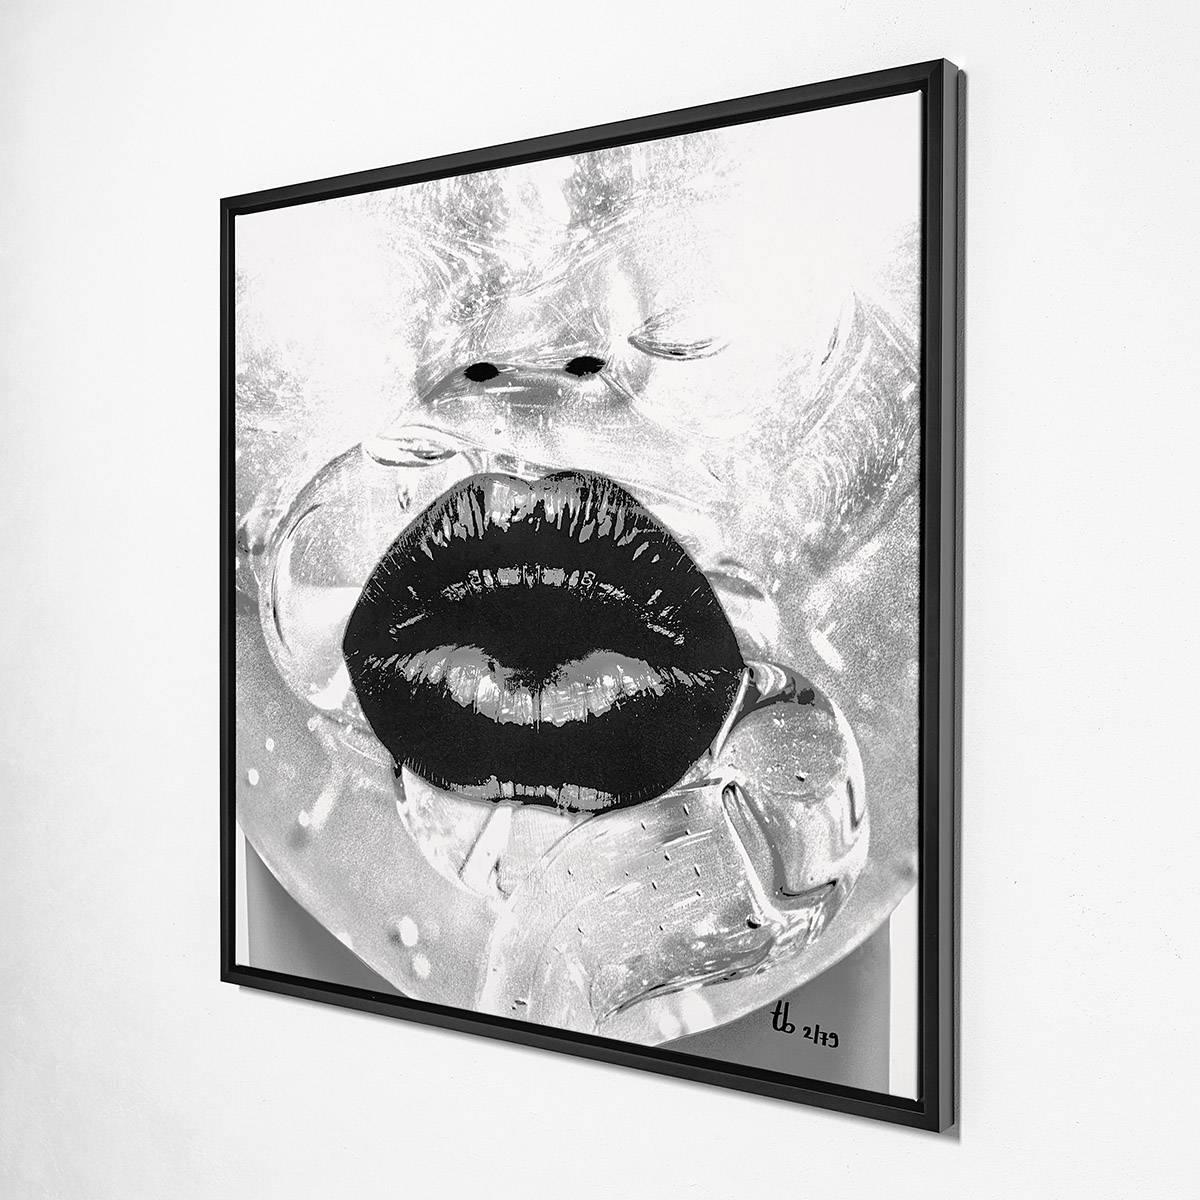 Too Much Talk II  - Limited Gold Edition of 79 - Contemporary Photograph by Thomas Bijen